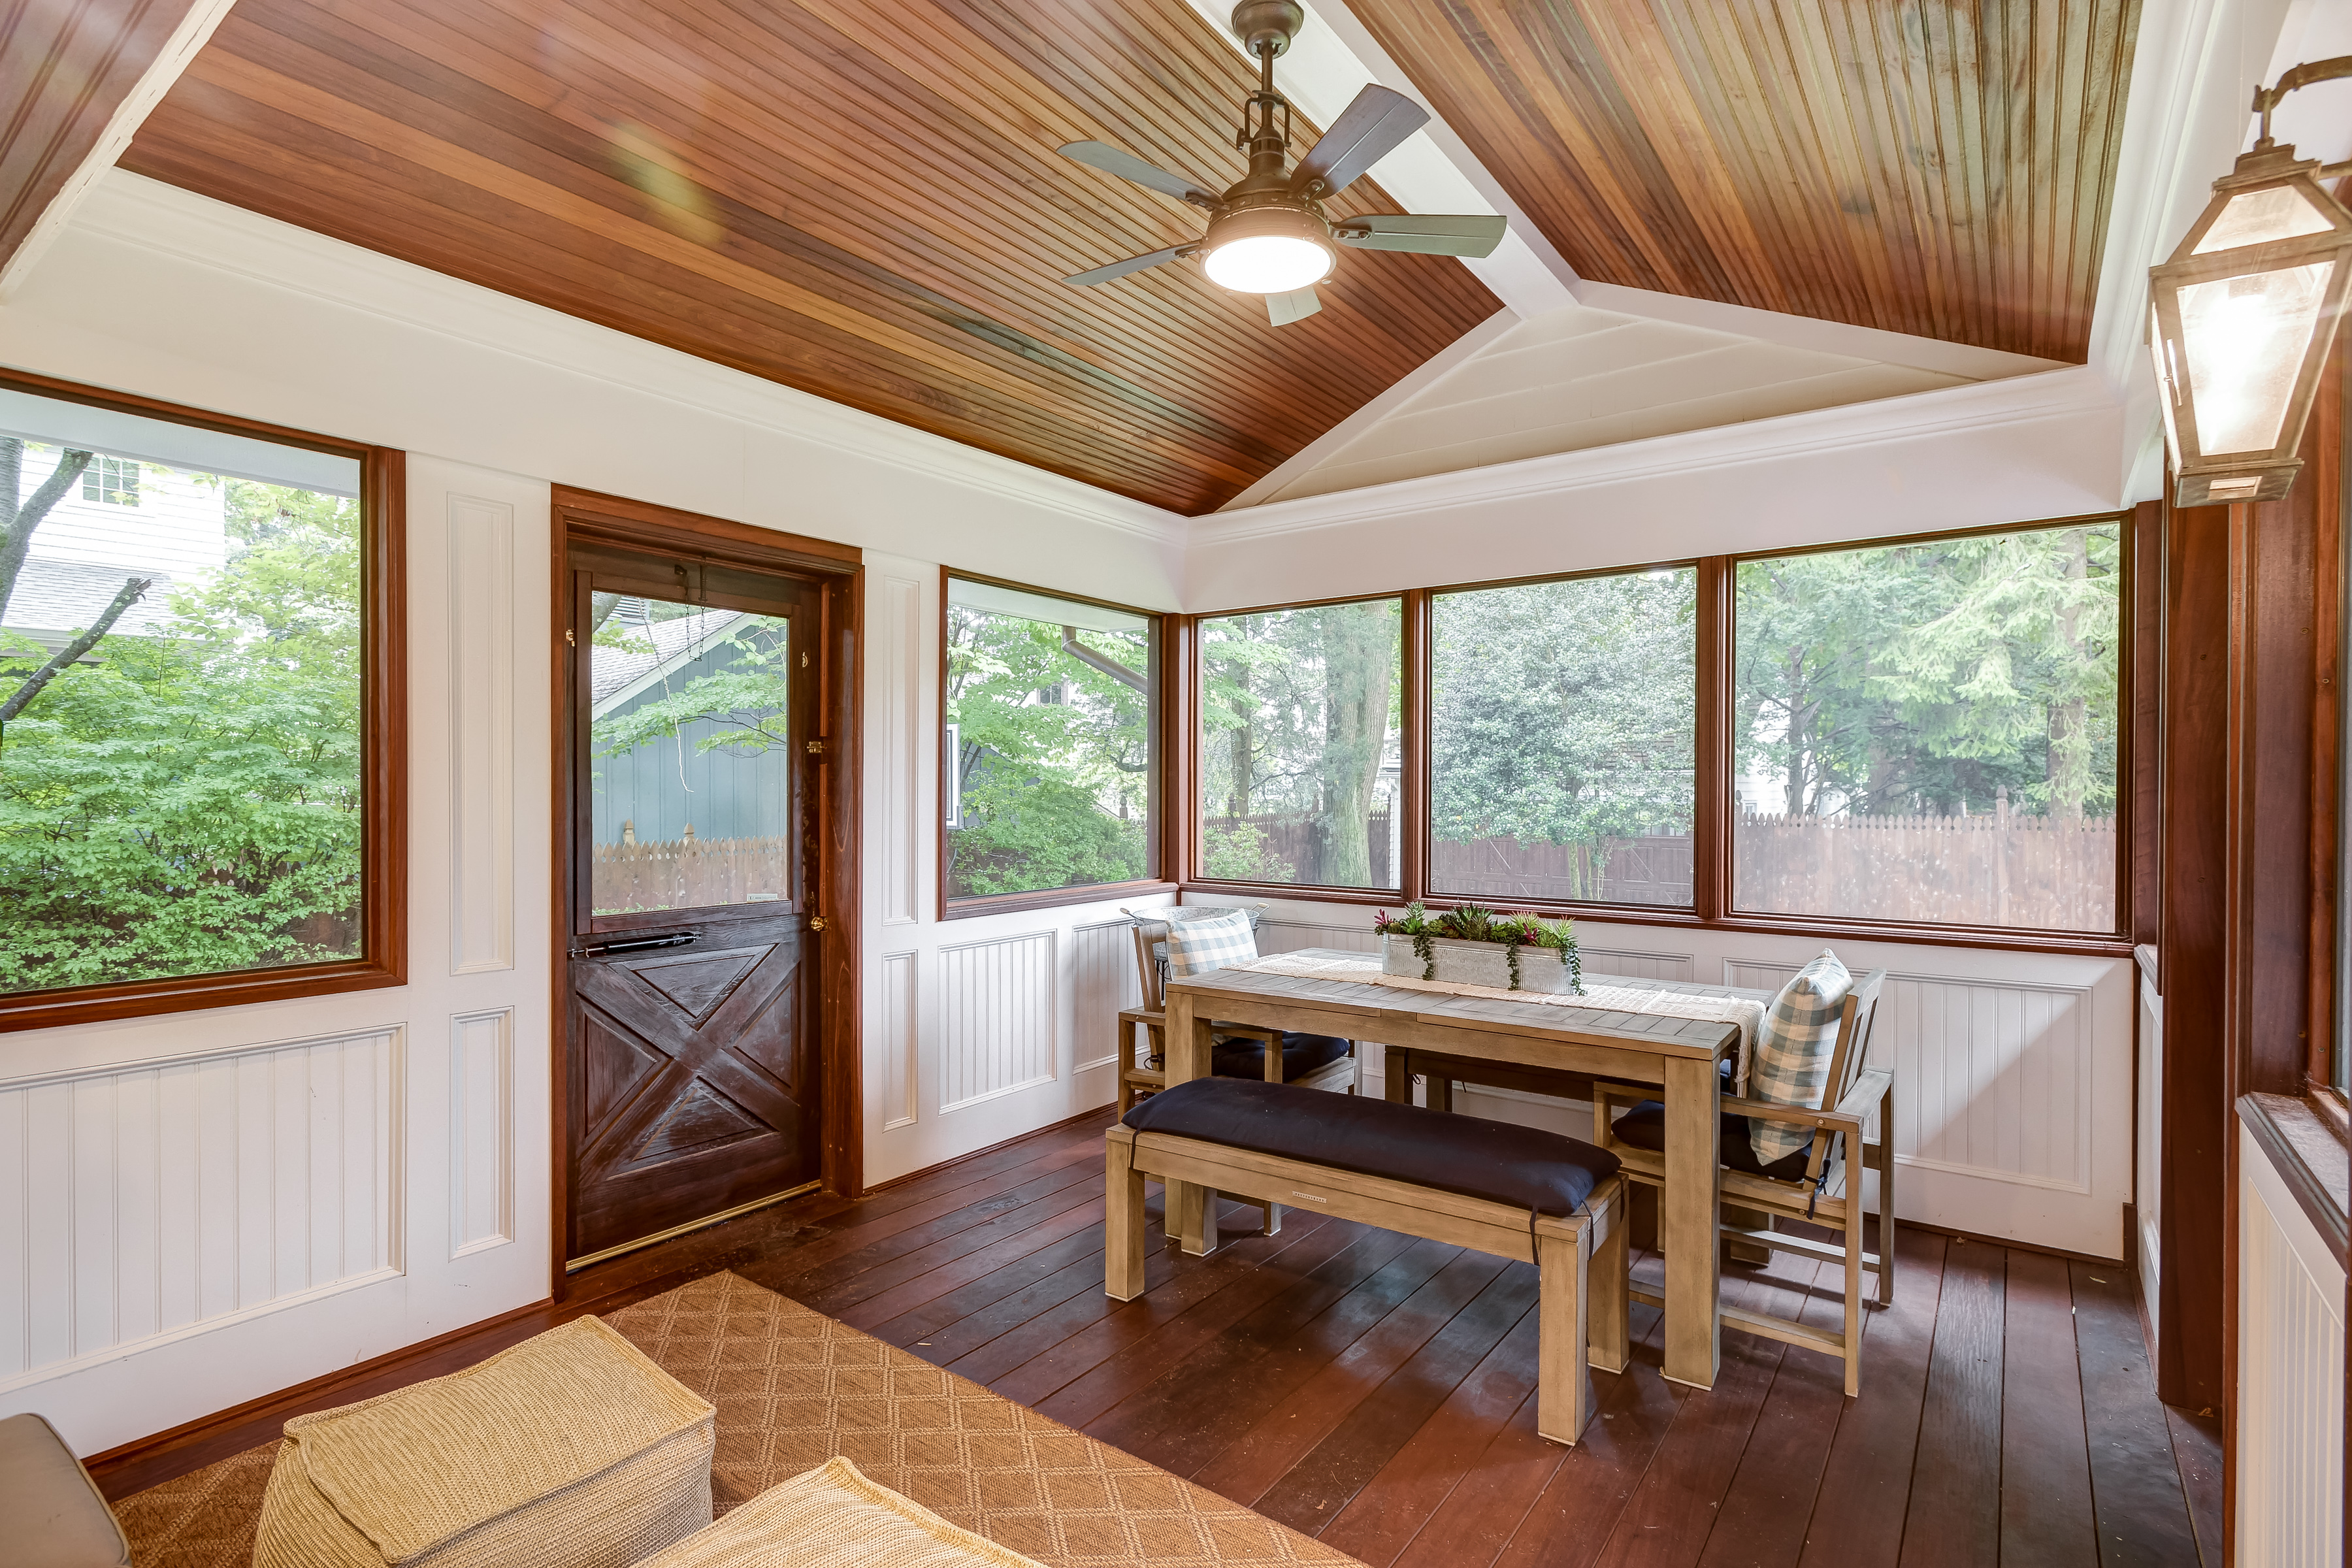 11 – 73 Knollwood Road – New Screened-In Porch